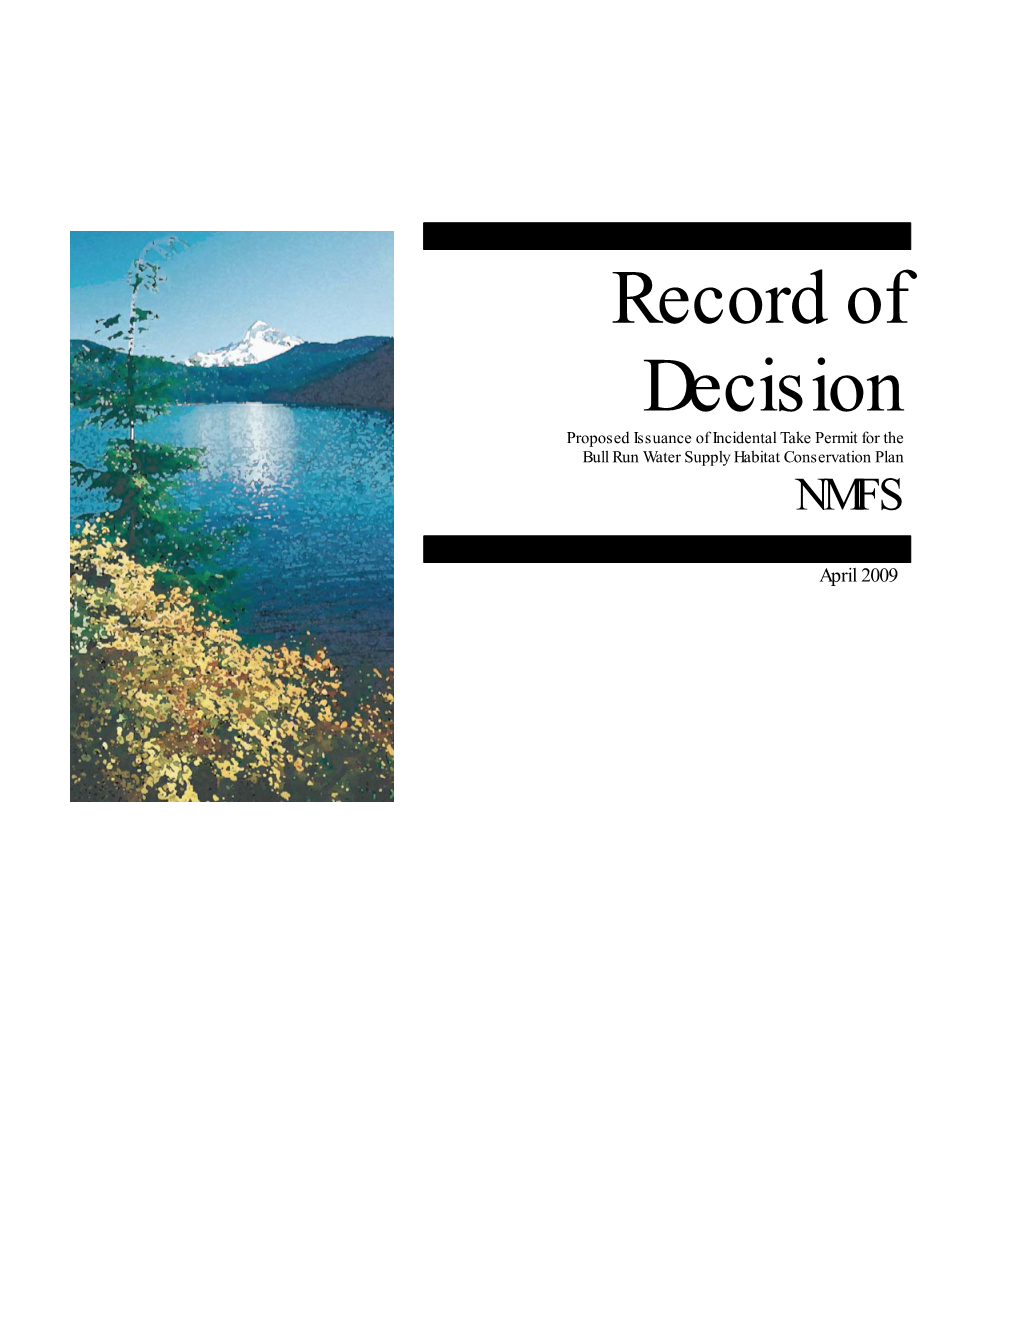 Record of Decision Proposed Issuance of Incidental Take Permit for the Bull Run Water Supply Habitat Conservation Plan NMFS